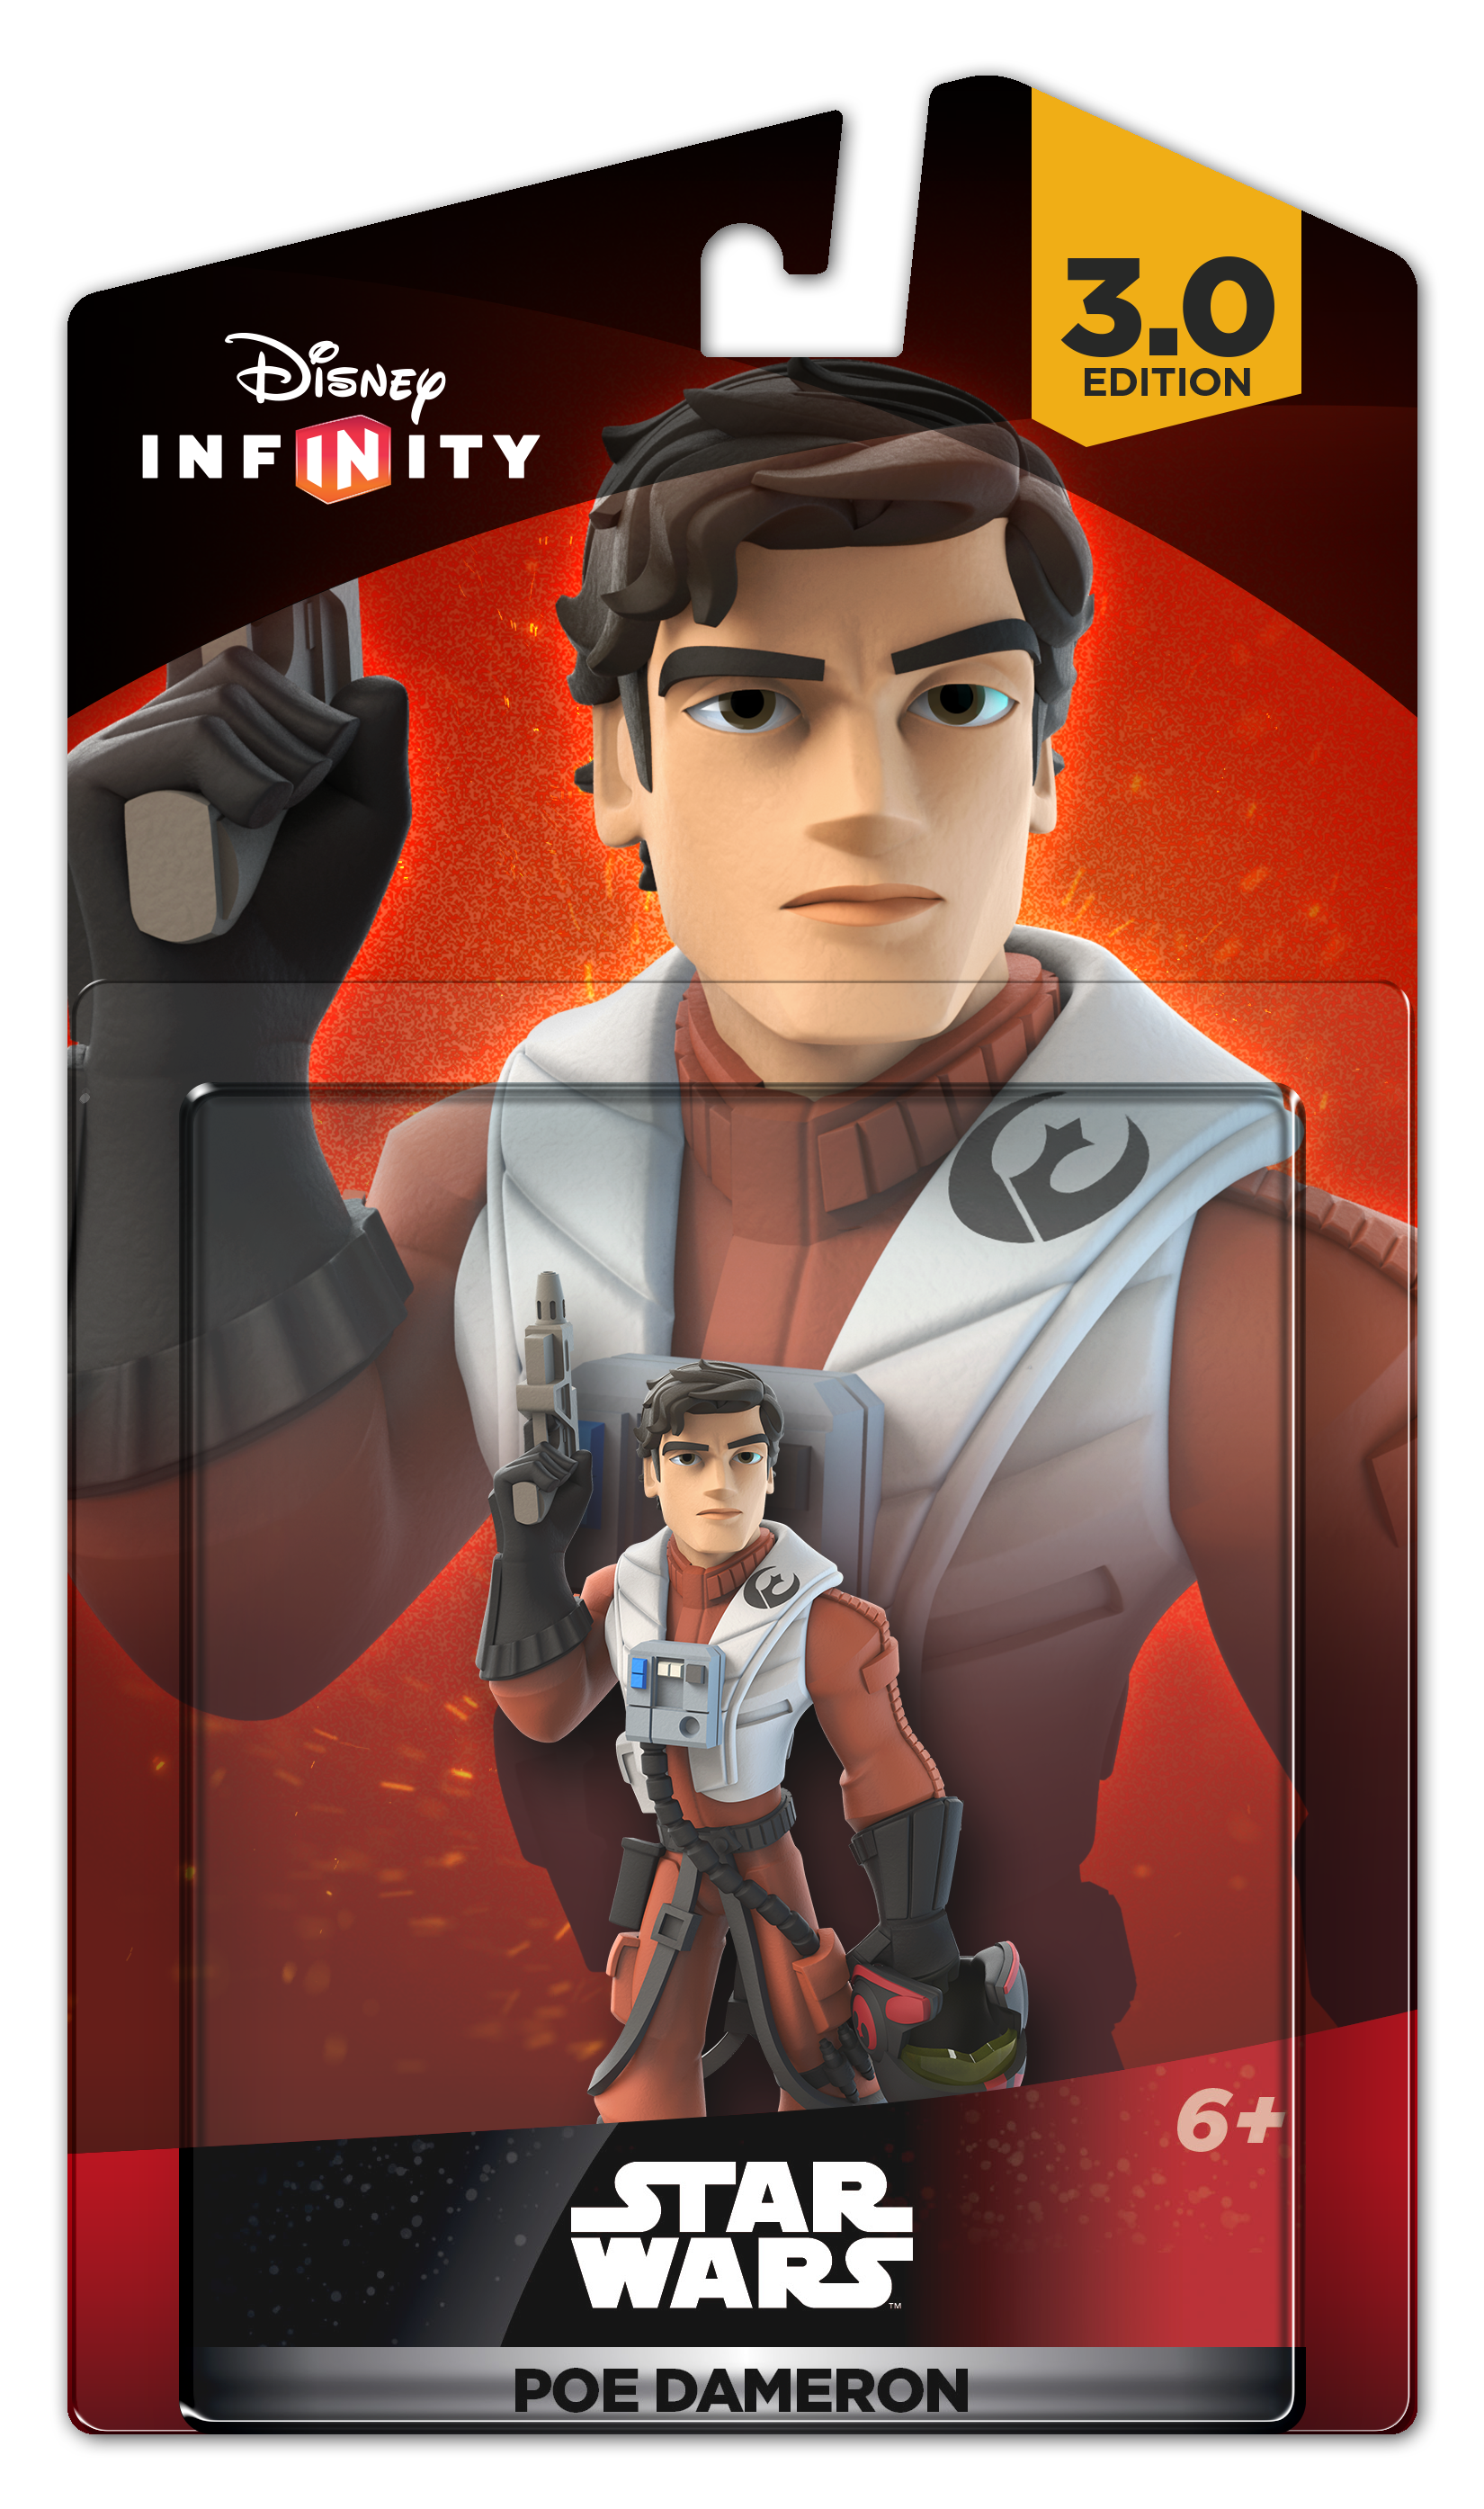 Star Wars: The Force Awakens Play Set for Disney Infinity 3.0 Edition Now  Available